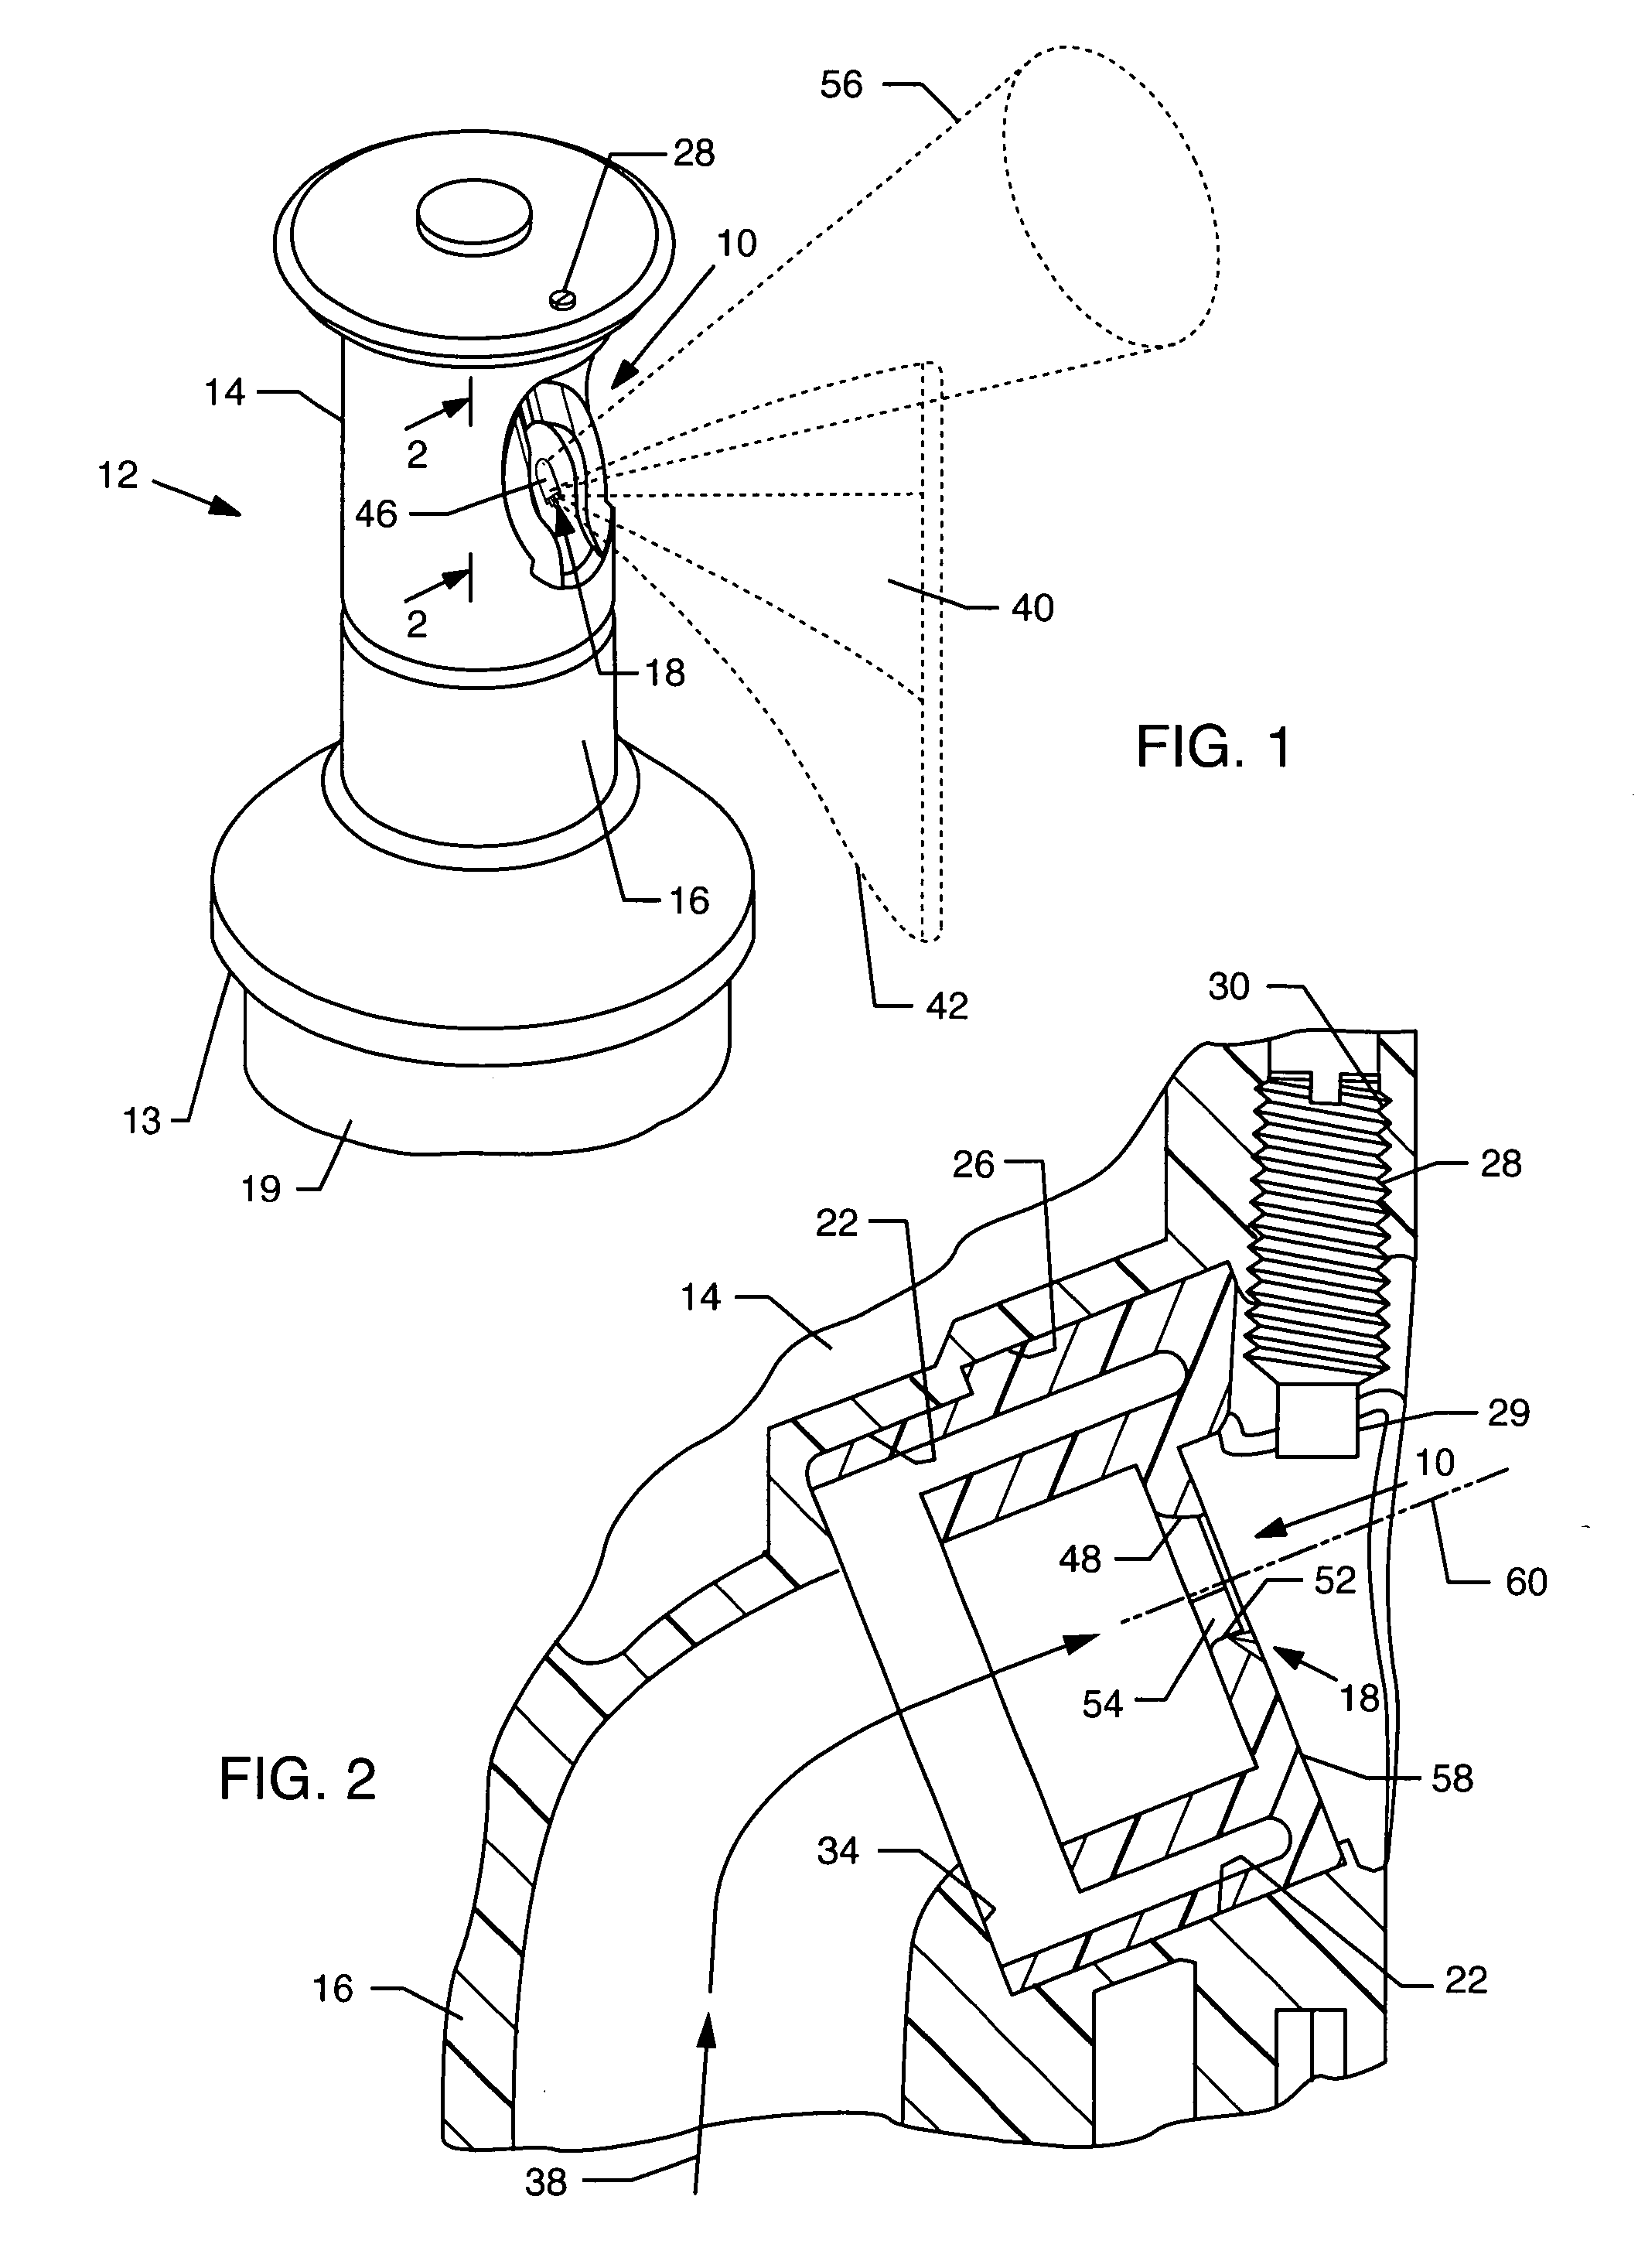 Irrigation sprinkler nozzle with enhanced close-in water distribution